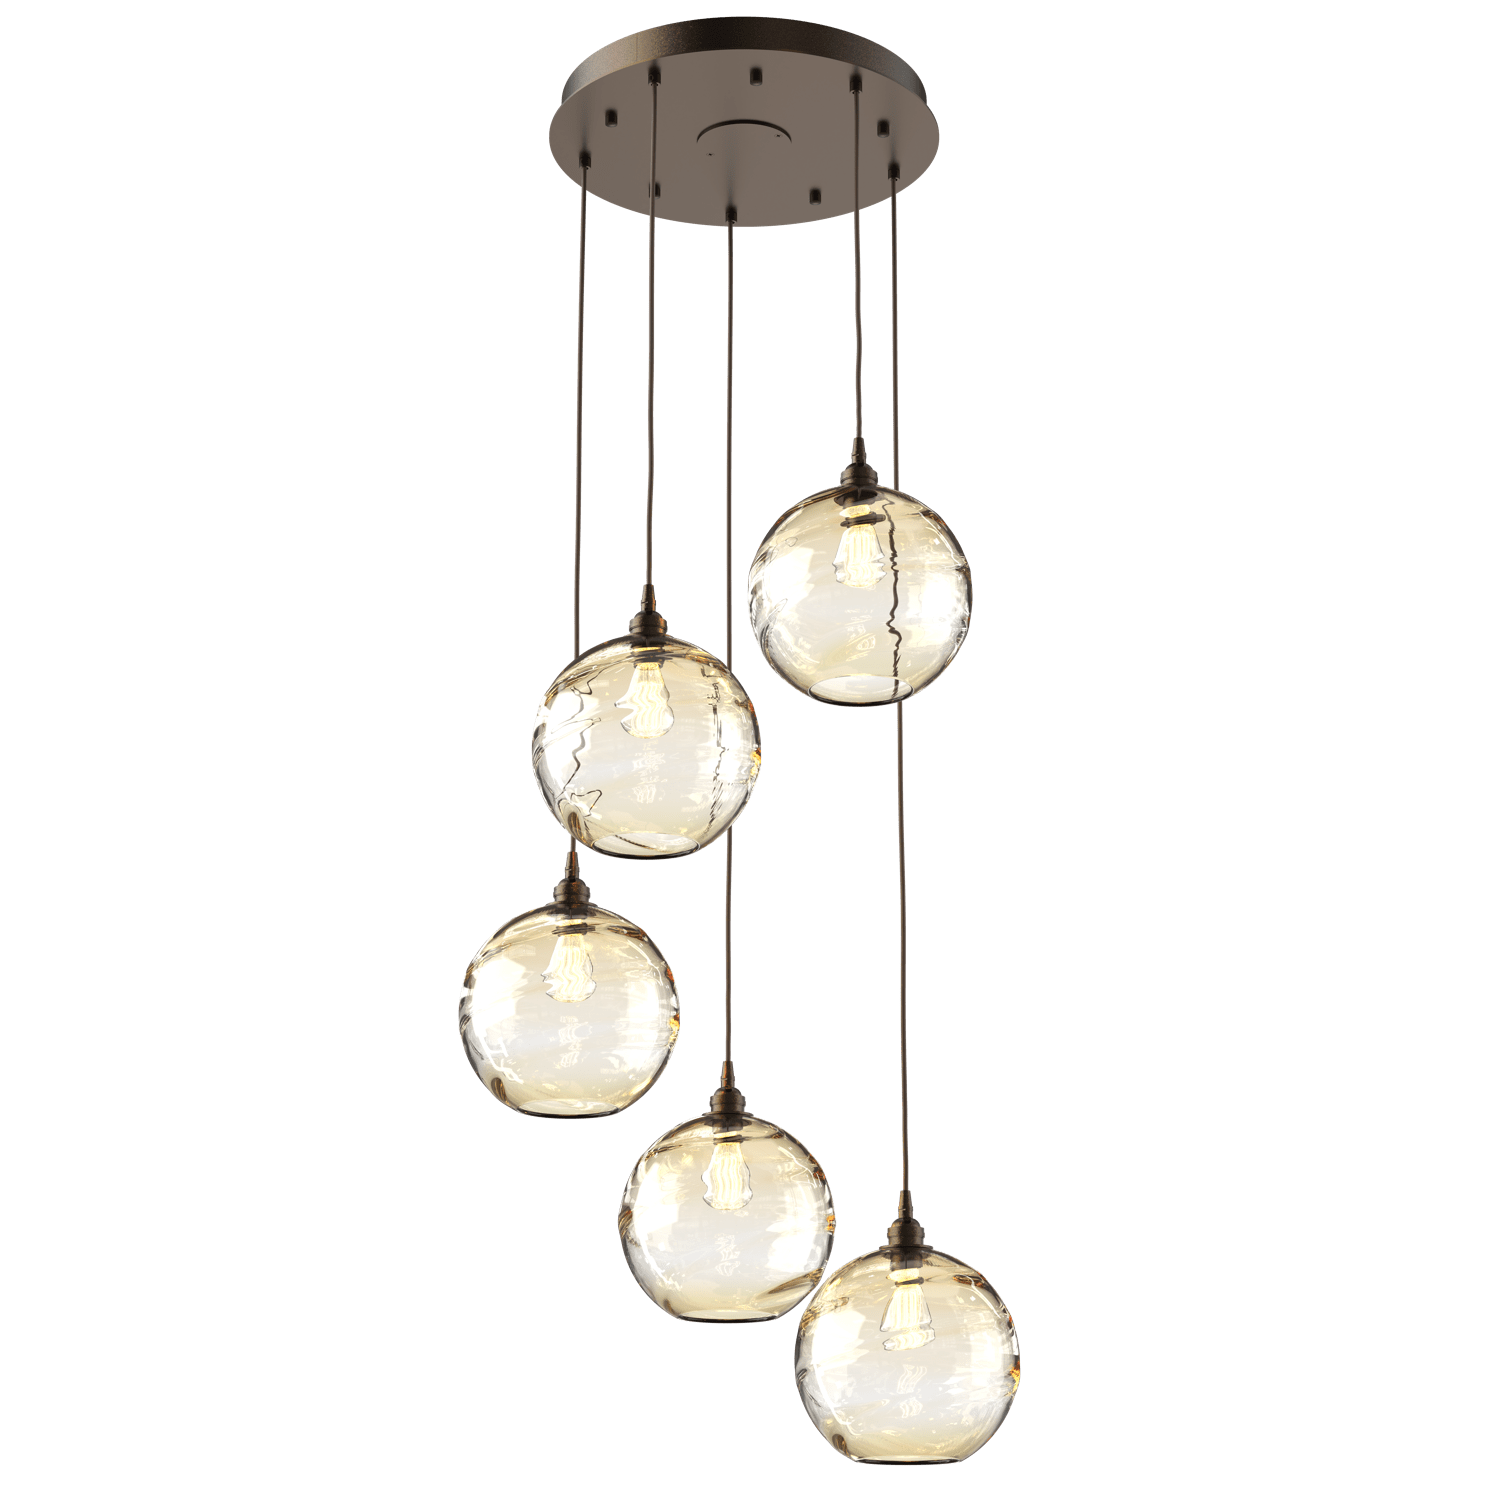 CHB0047-05-FB-OA-Hammerton-Studio-Optic-Blown-Glass-Terra-5-light-round-pendant-chandelier-with-flat-bronze-finish-and-optic-amber-blown-glass-shades-and-incandescent-lamping